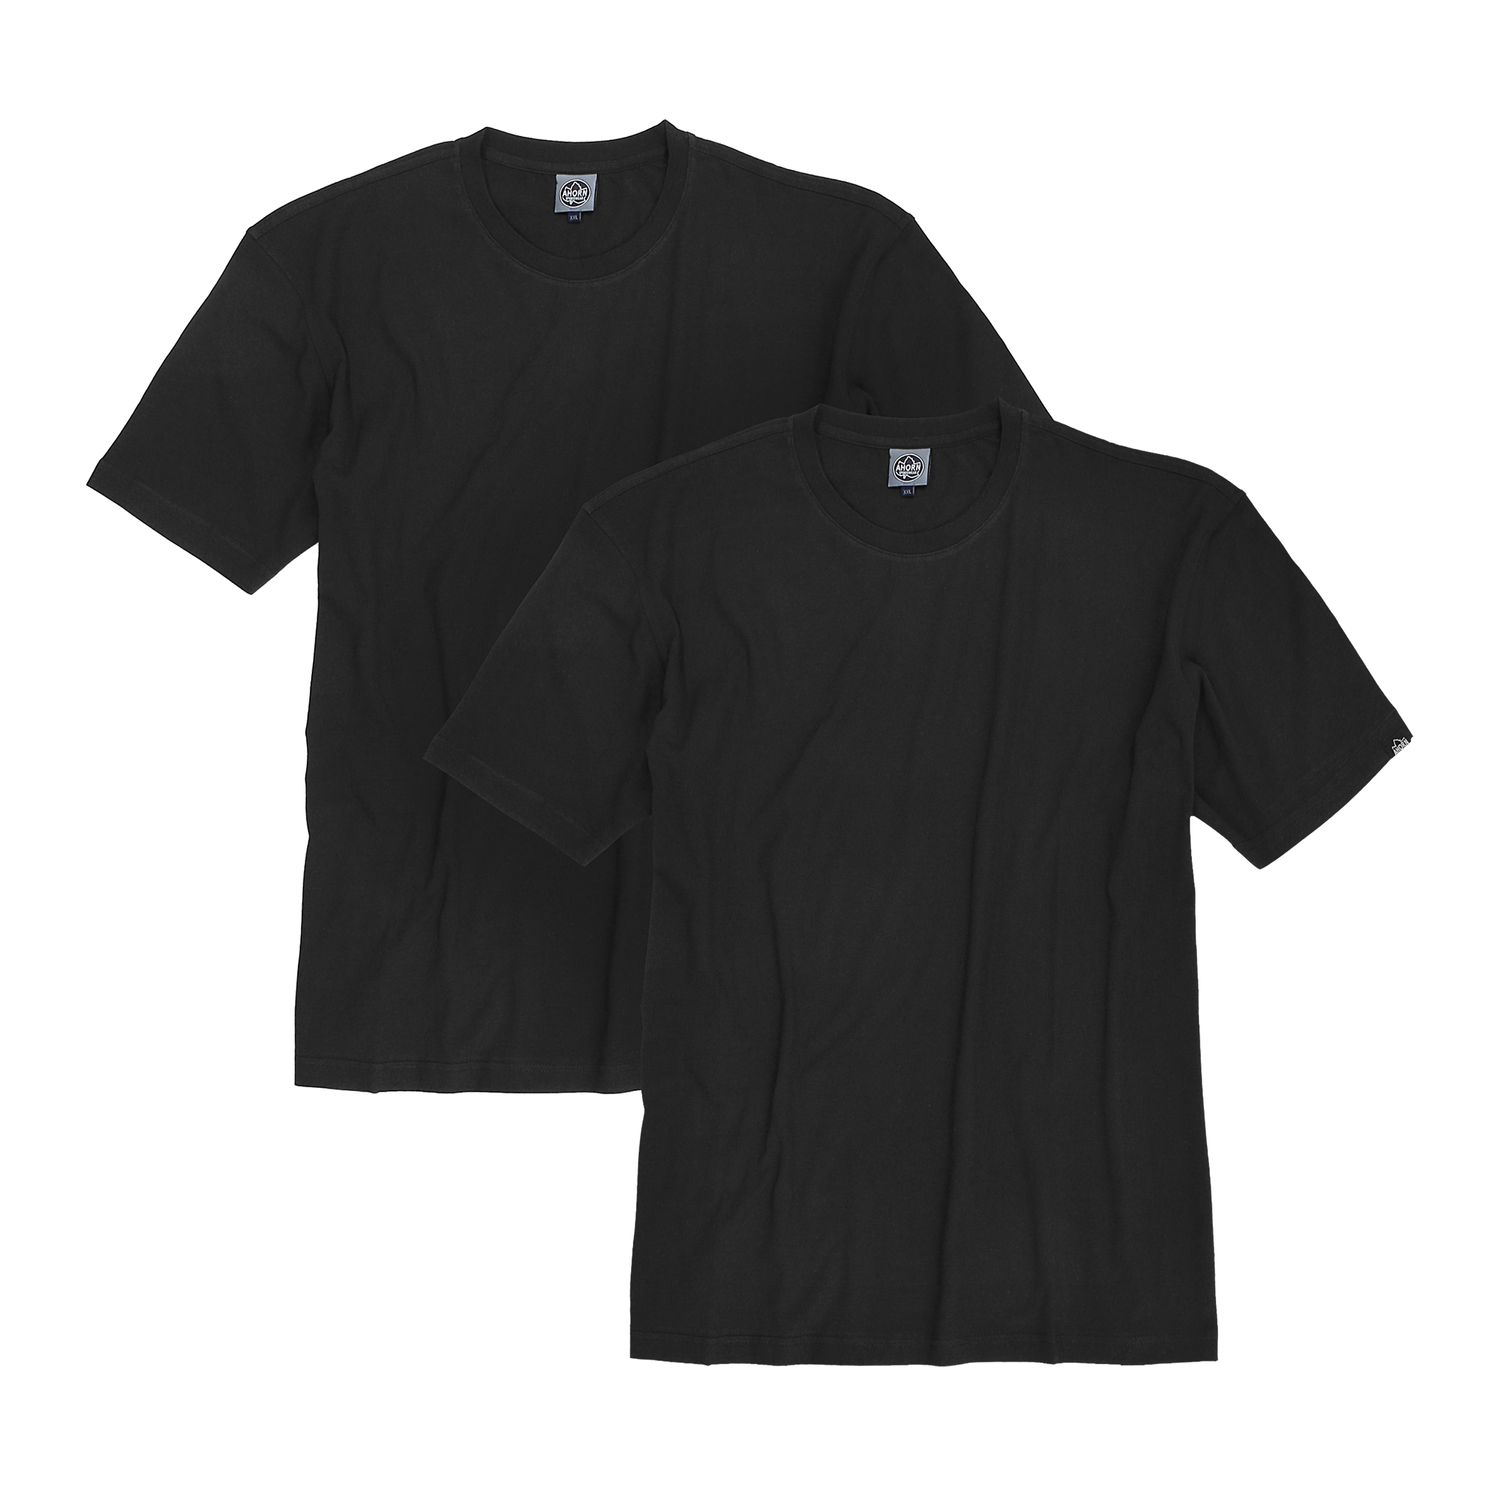 T-shirt in black by Ahorn Sportswear in extra large sizes up to 10XL- double pack